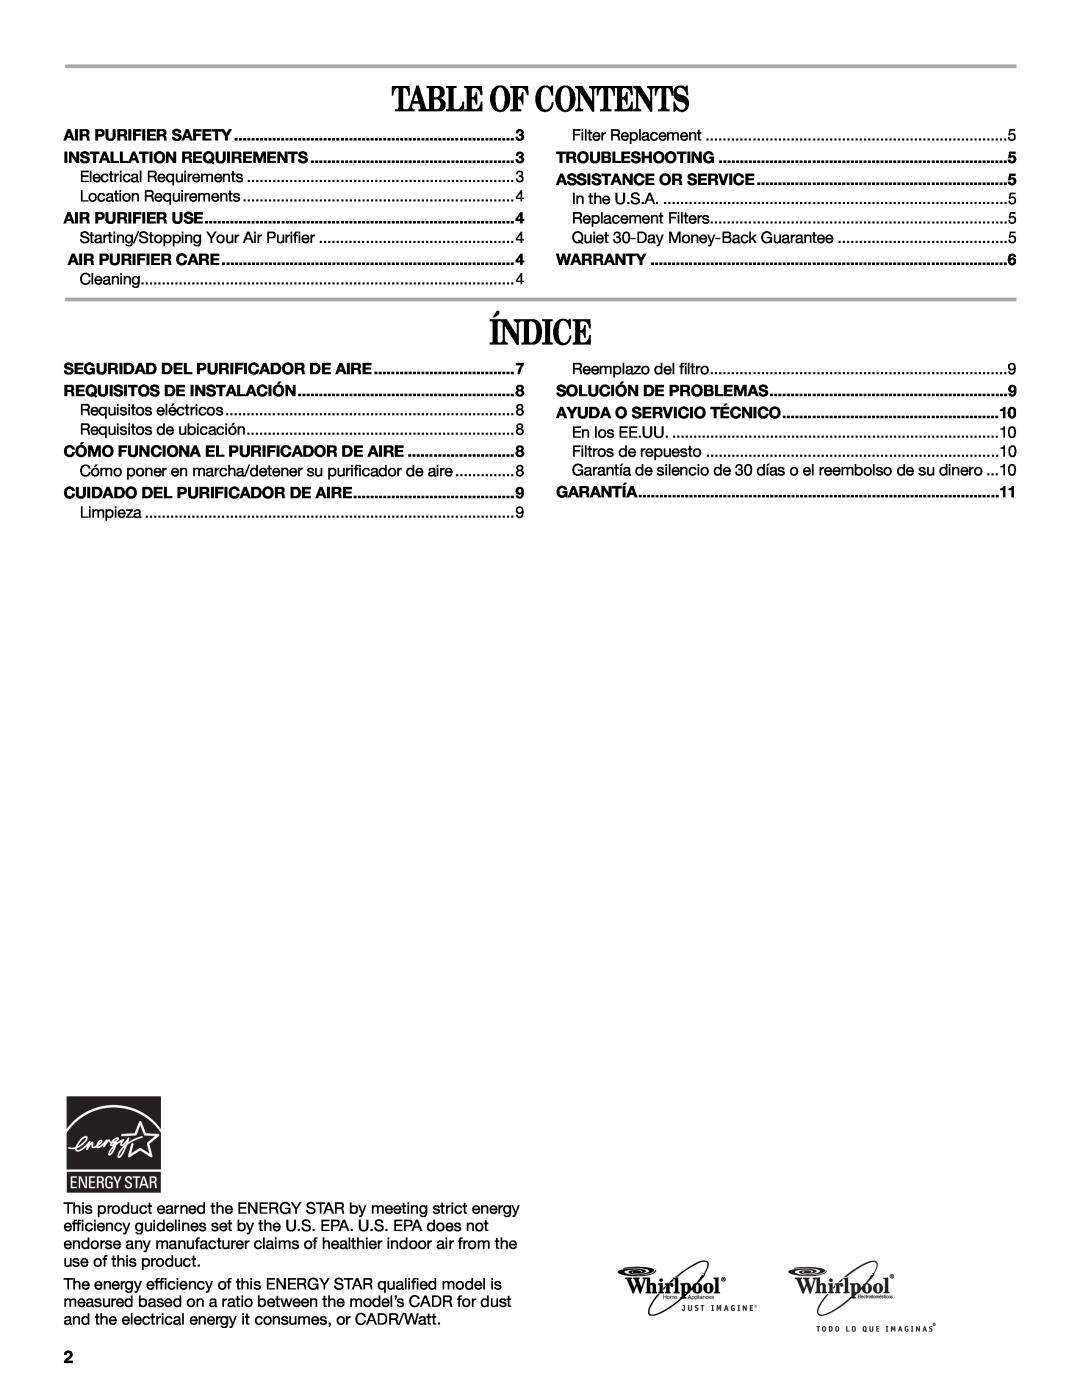 Whirlpool 1188694 manual Table Of Contents, Índice 